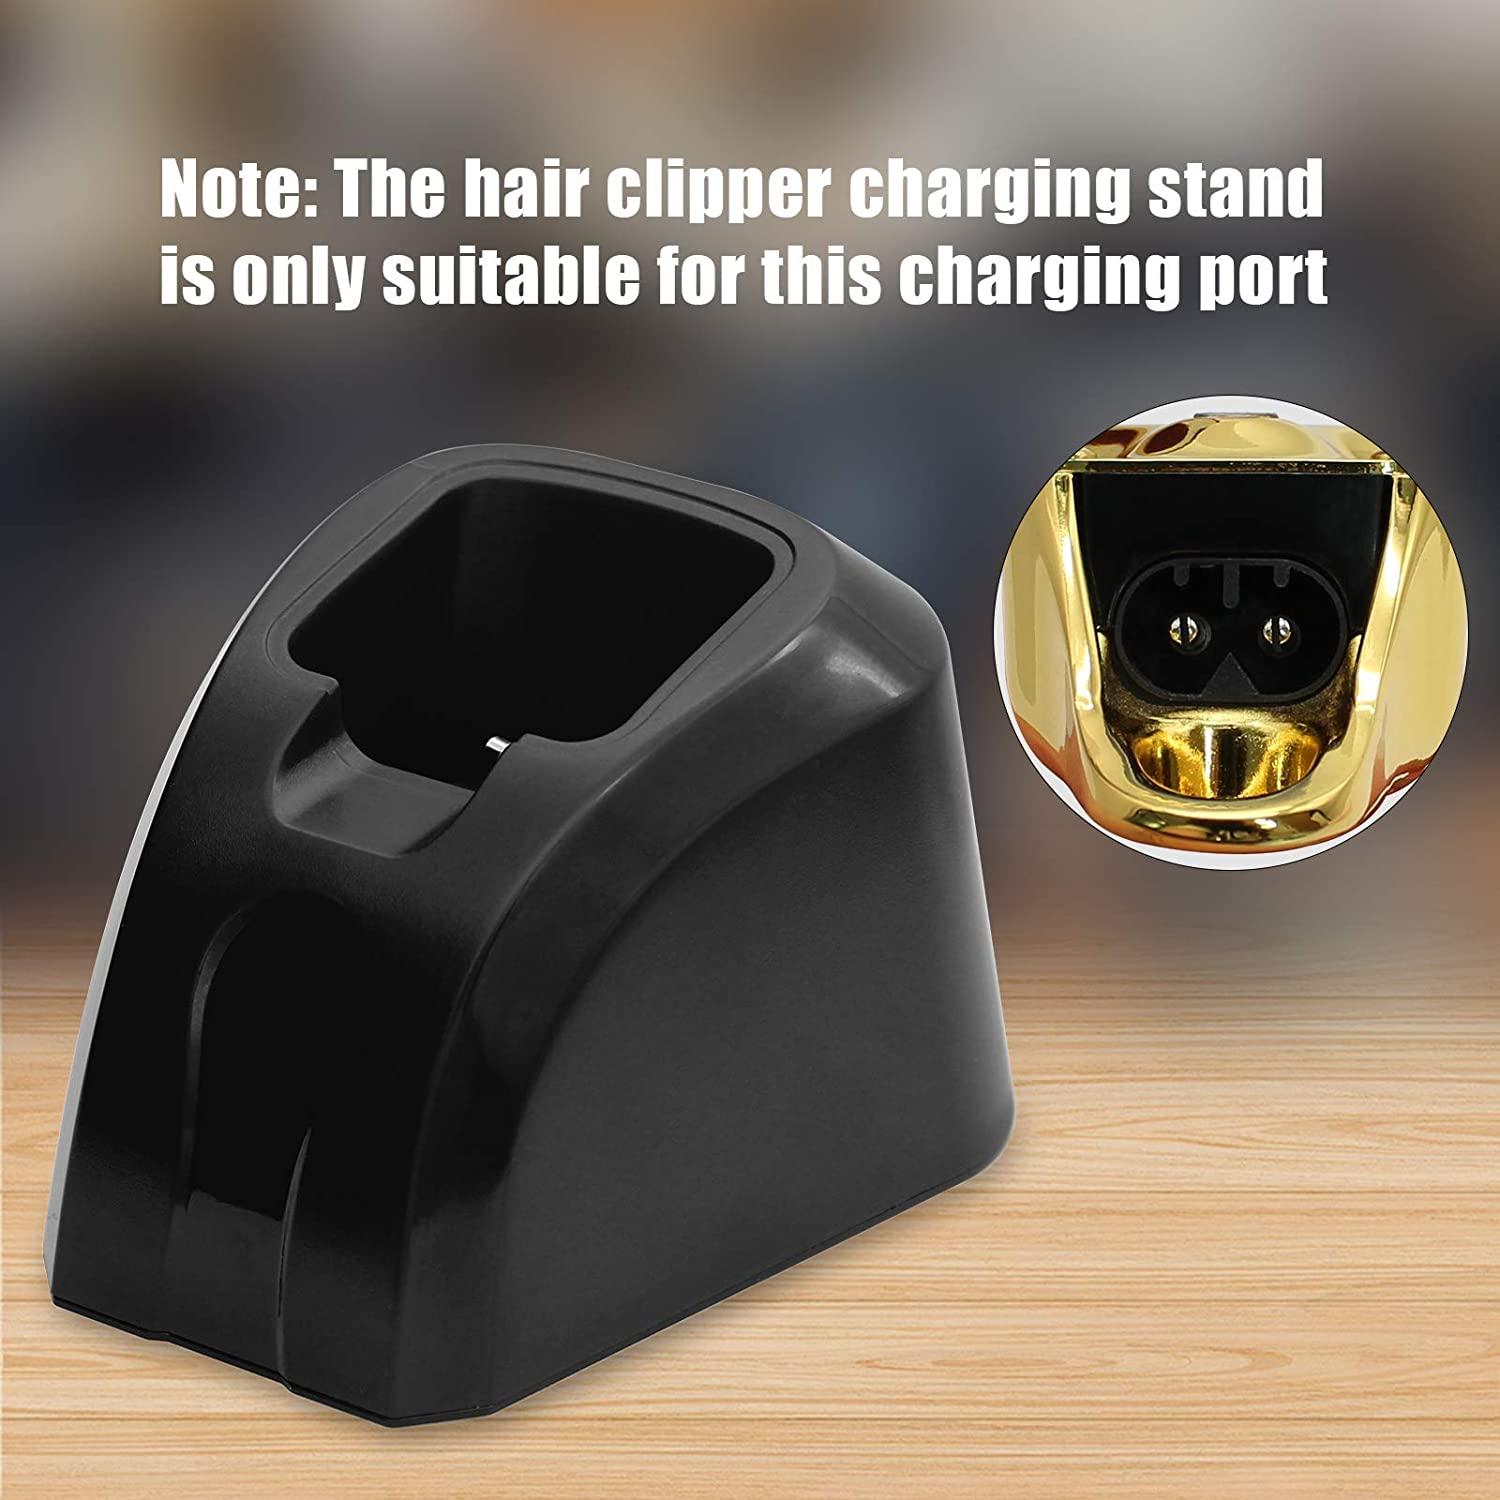  Anrom Vertical Hair Clippers Charging Stand, Portable